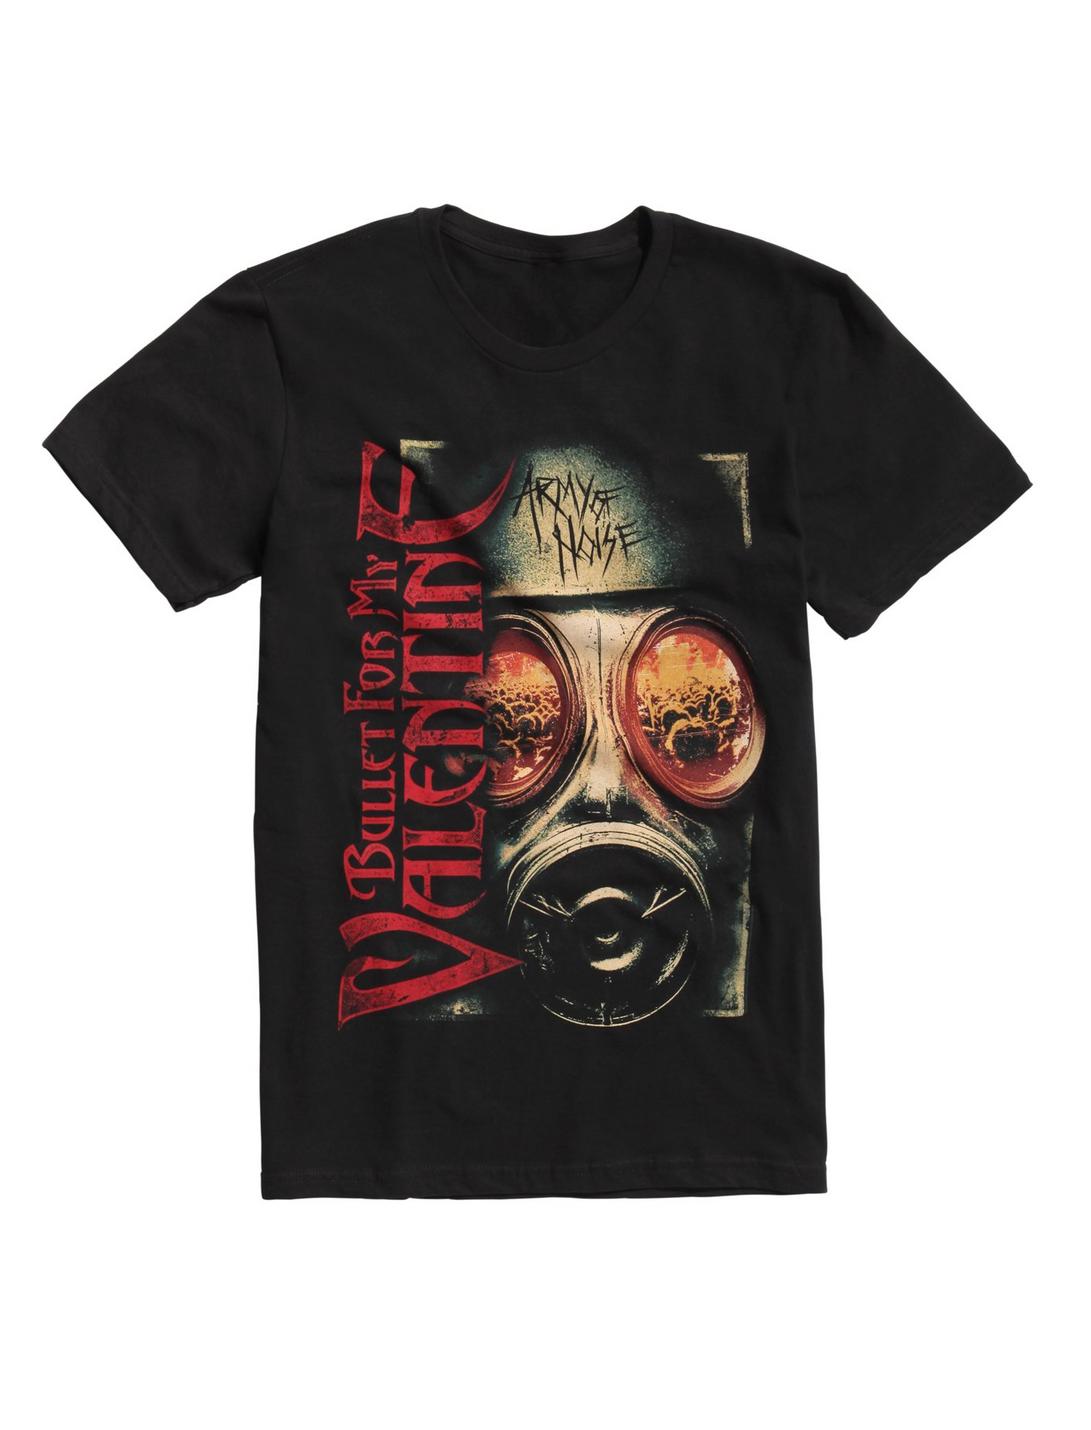 Bullet For My Valentine Army Of Noise T-Shirt, BLACK, hi-res